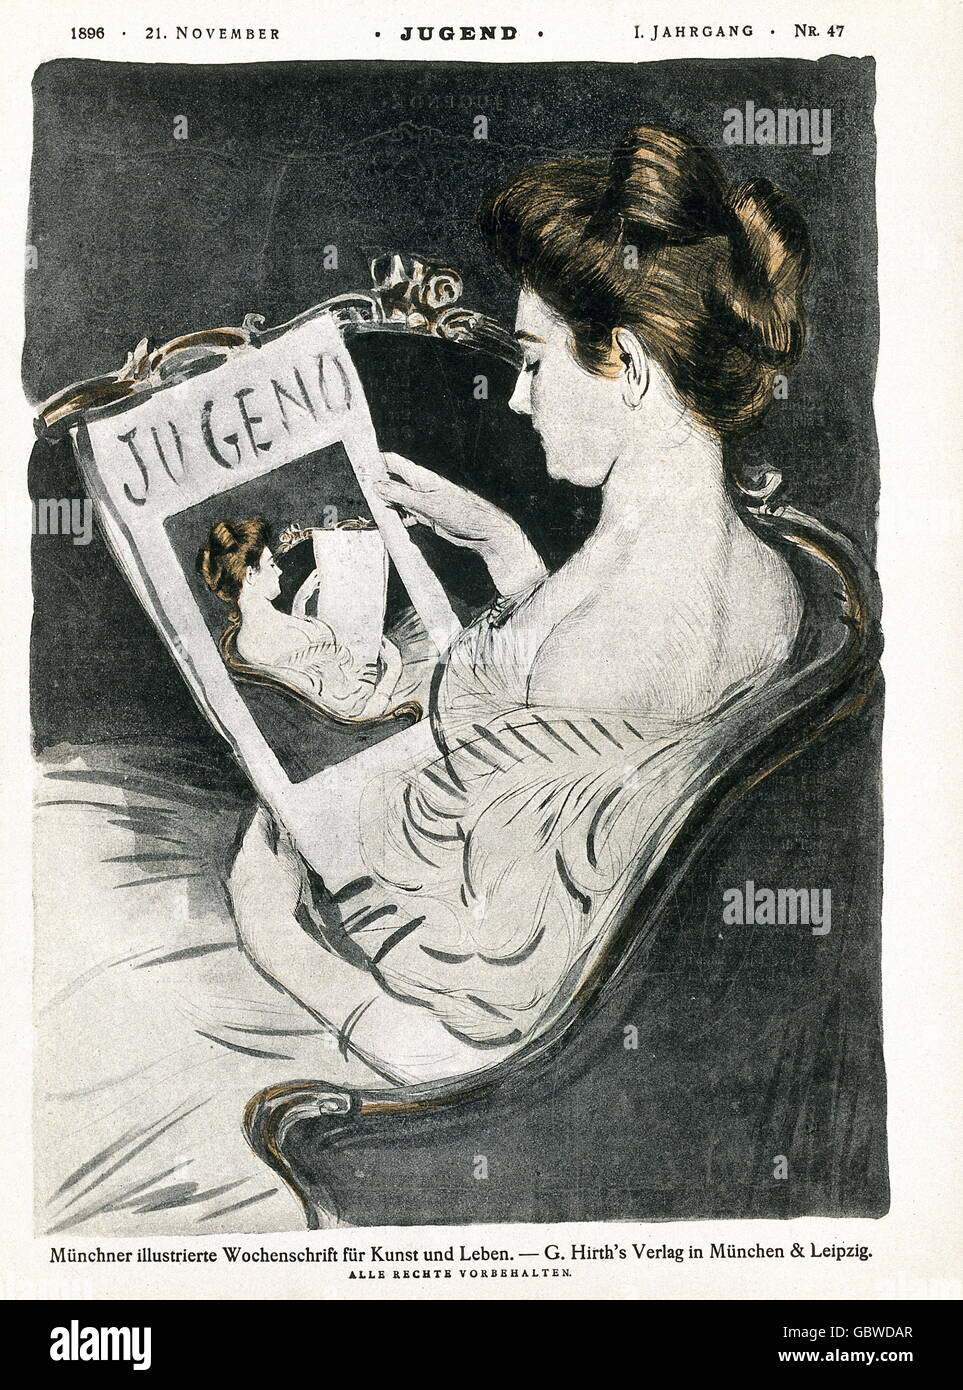 press / media, magazines, Germany, 'Jugend' (Youth), number 47, volume 1, title, G. Hirth's publishing house, Munich & Leipzig, 21.11.1896, Additional-Rights-Clearences-Not Available Stock Photo